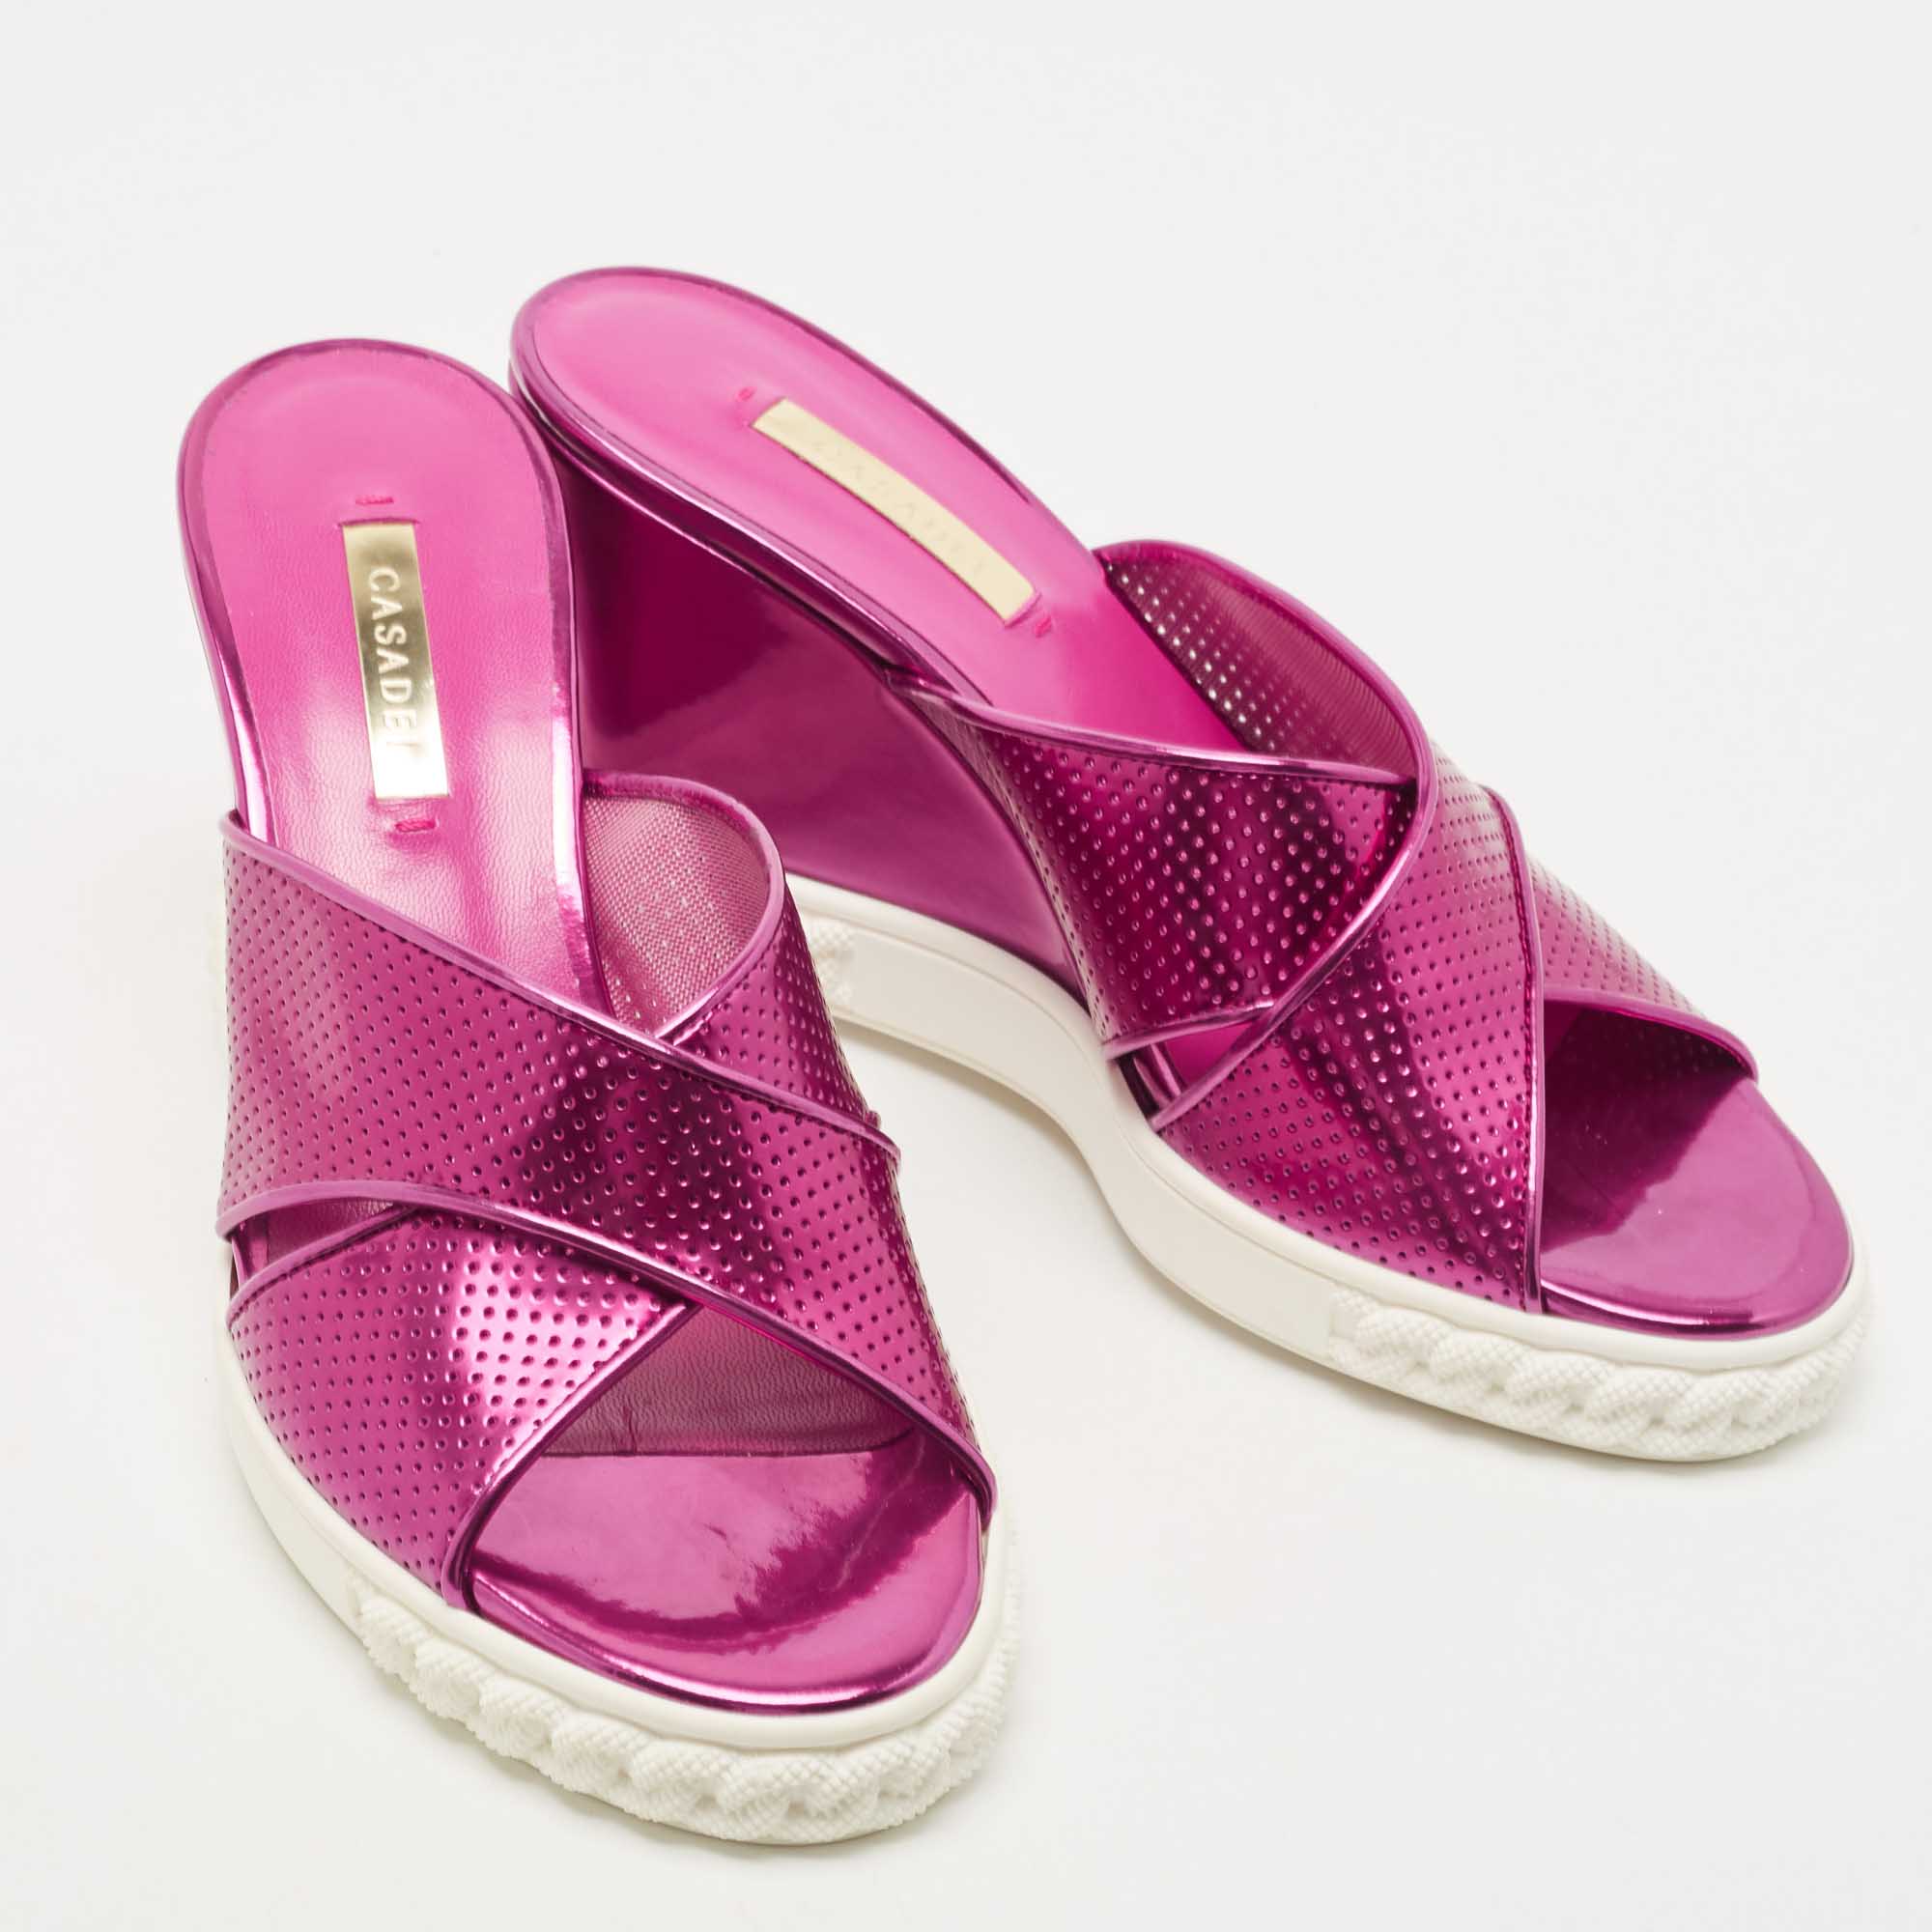 Casadei Pink Perforated Patent Leather Criss Cross Wedge Sandals Size 38